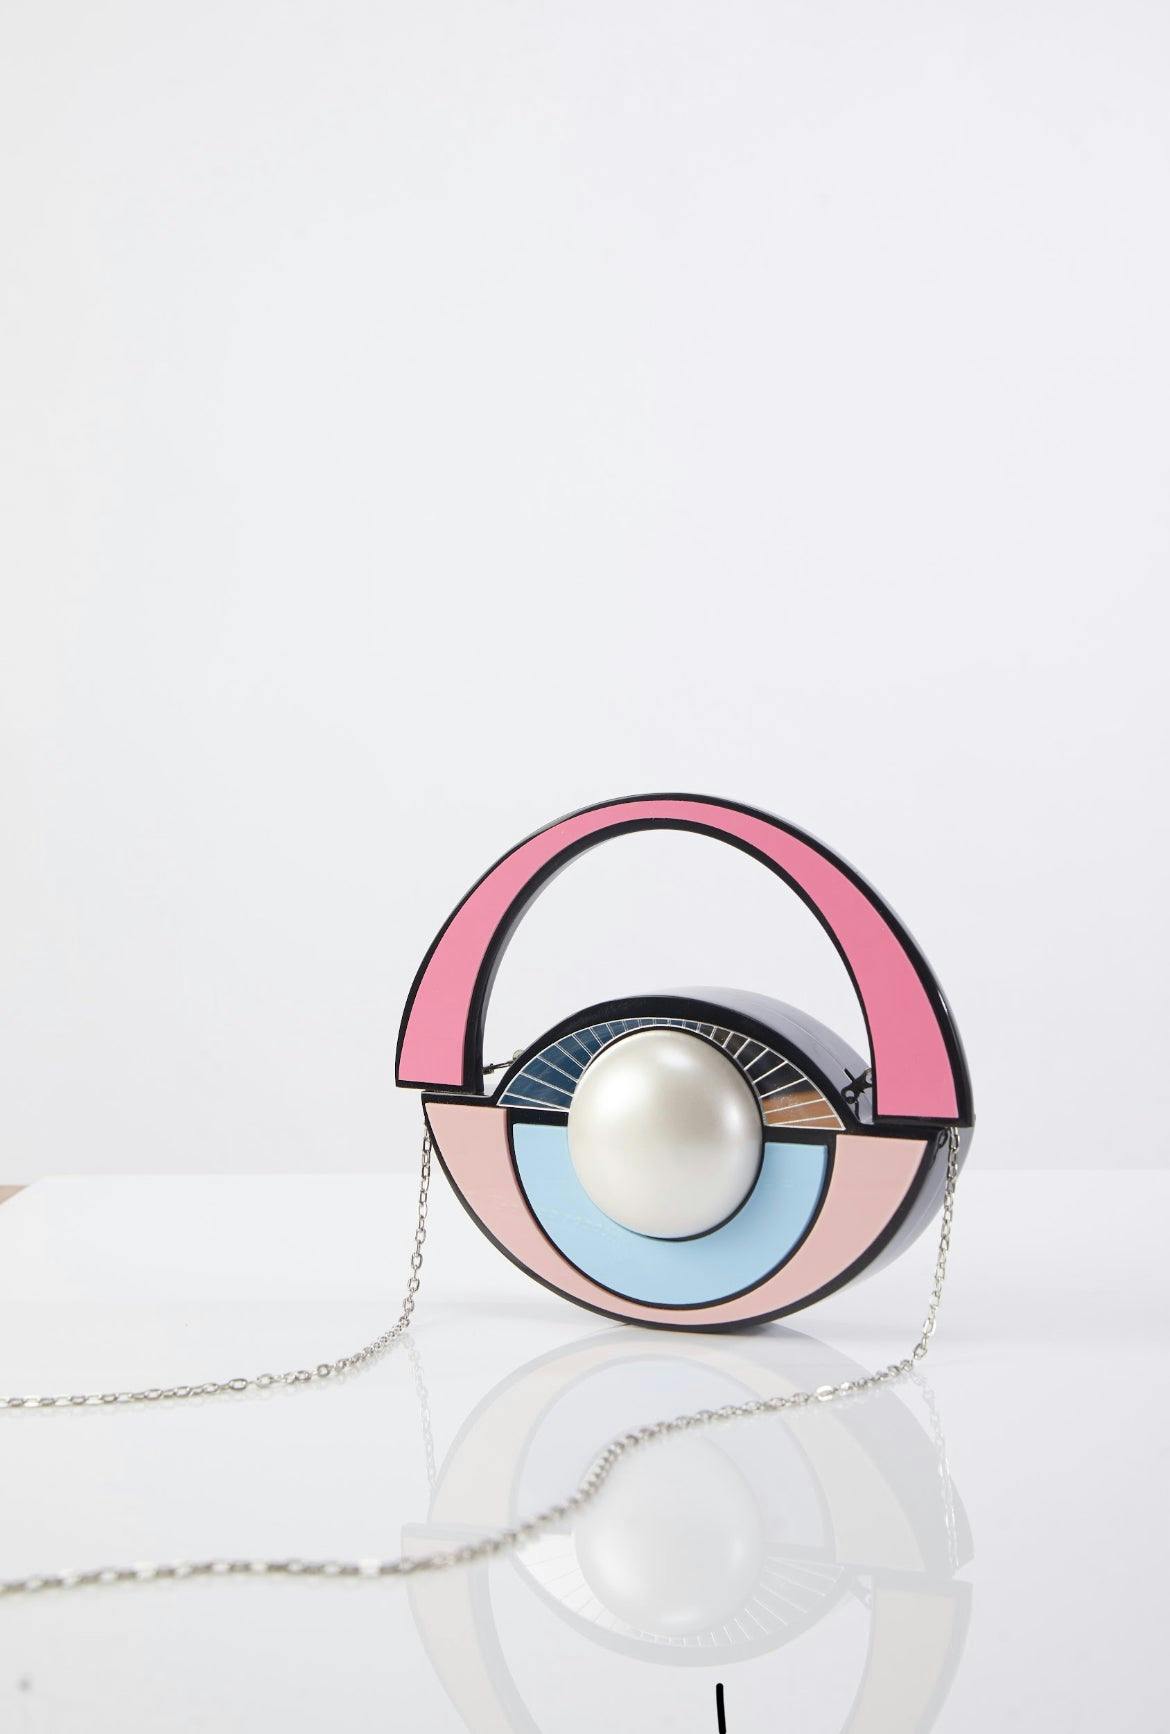 Big Boss Bag | Pink, a product by Curated Curiosities